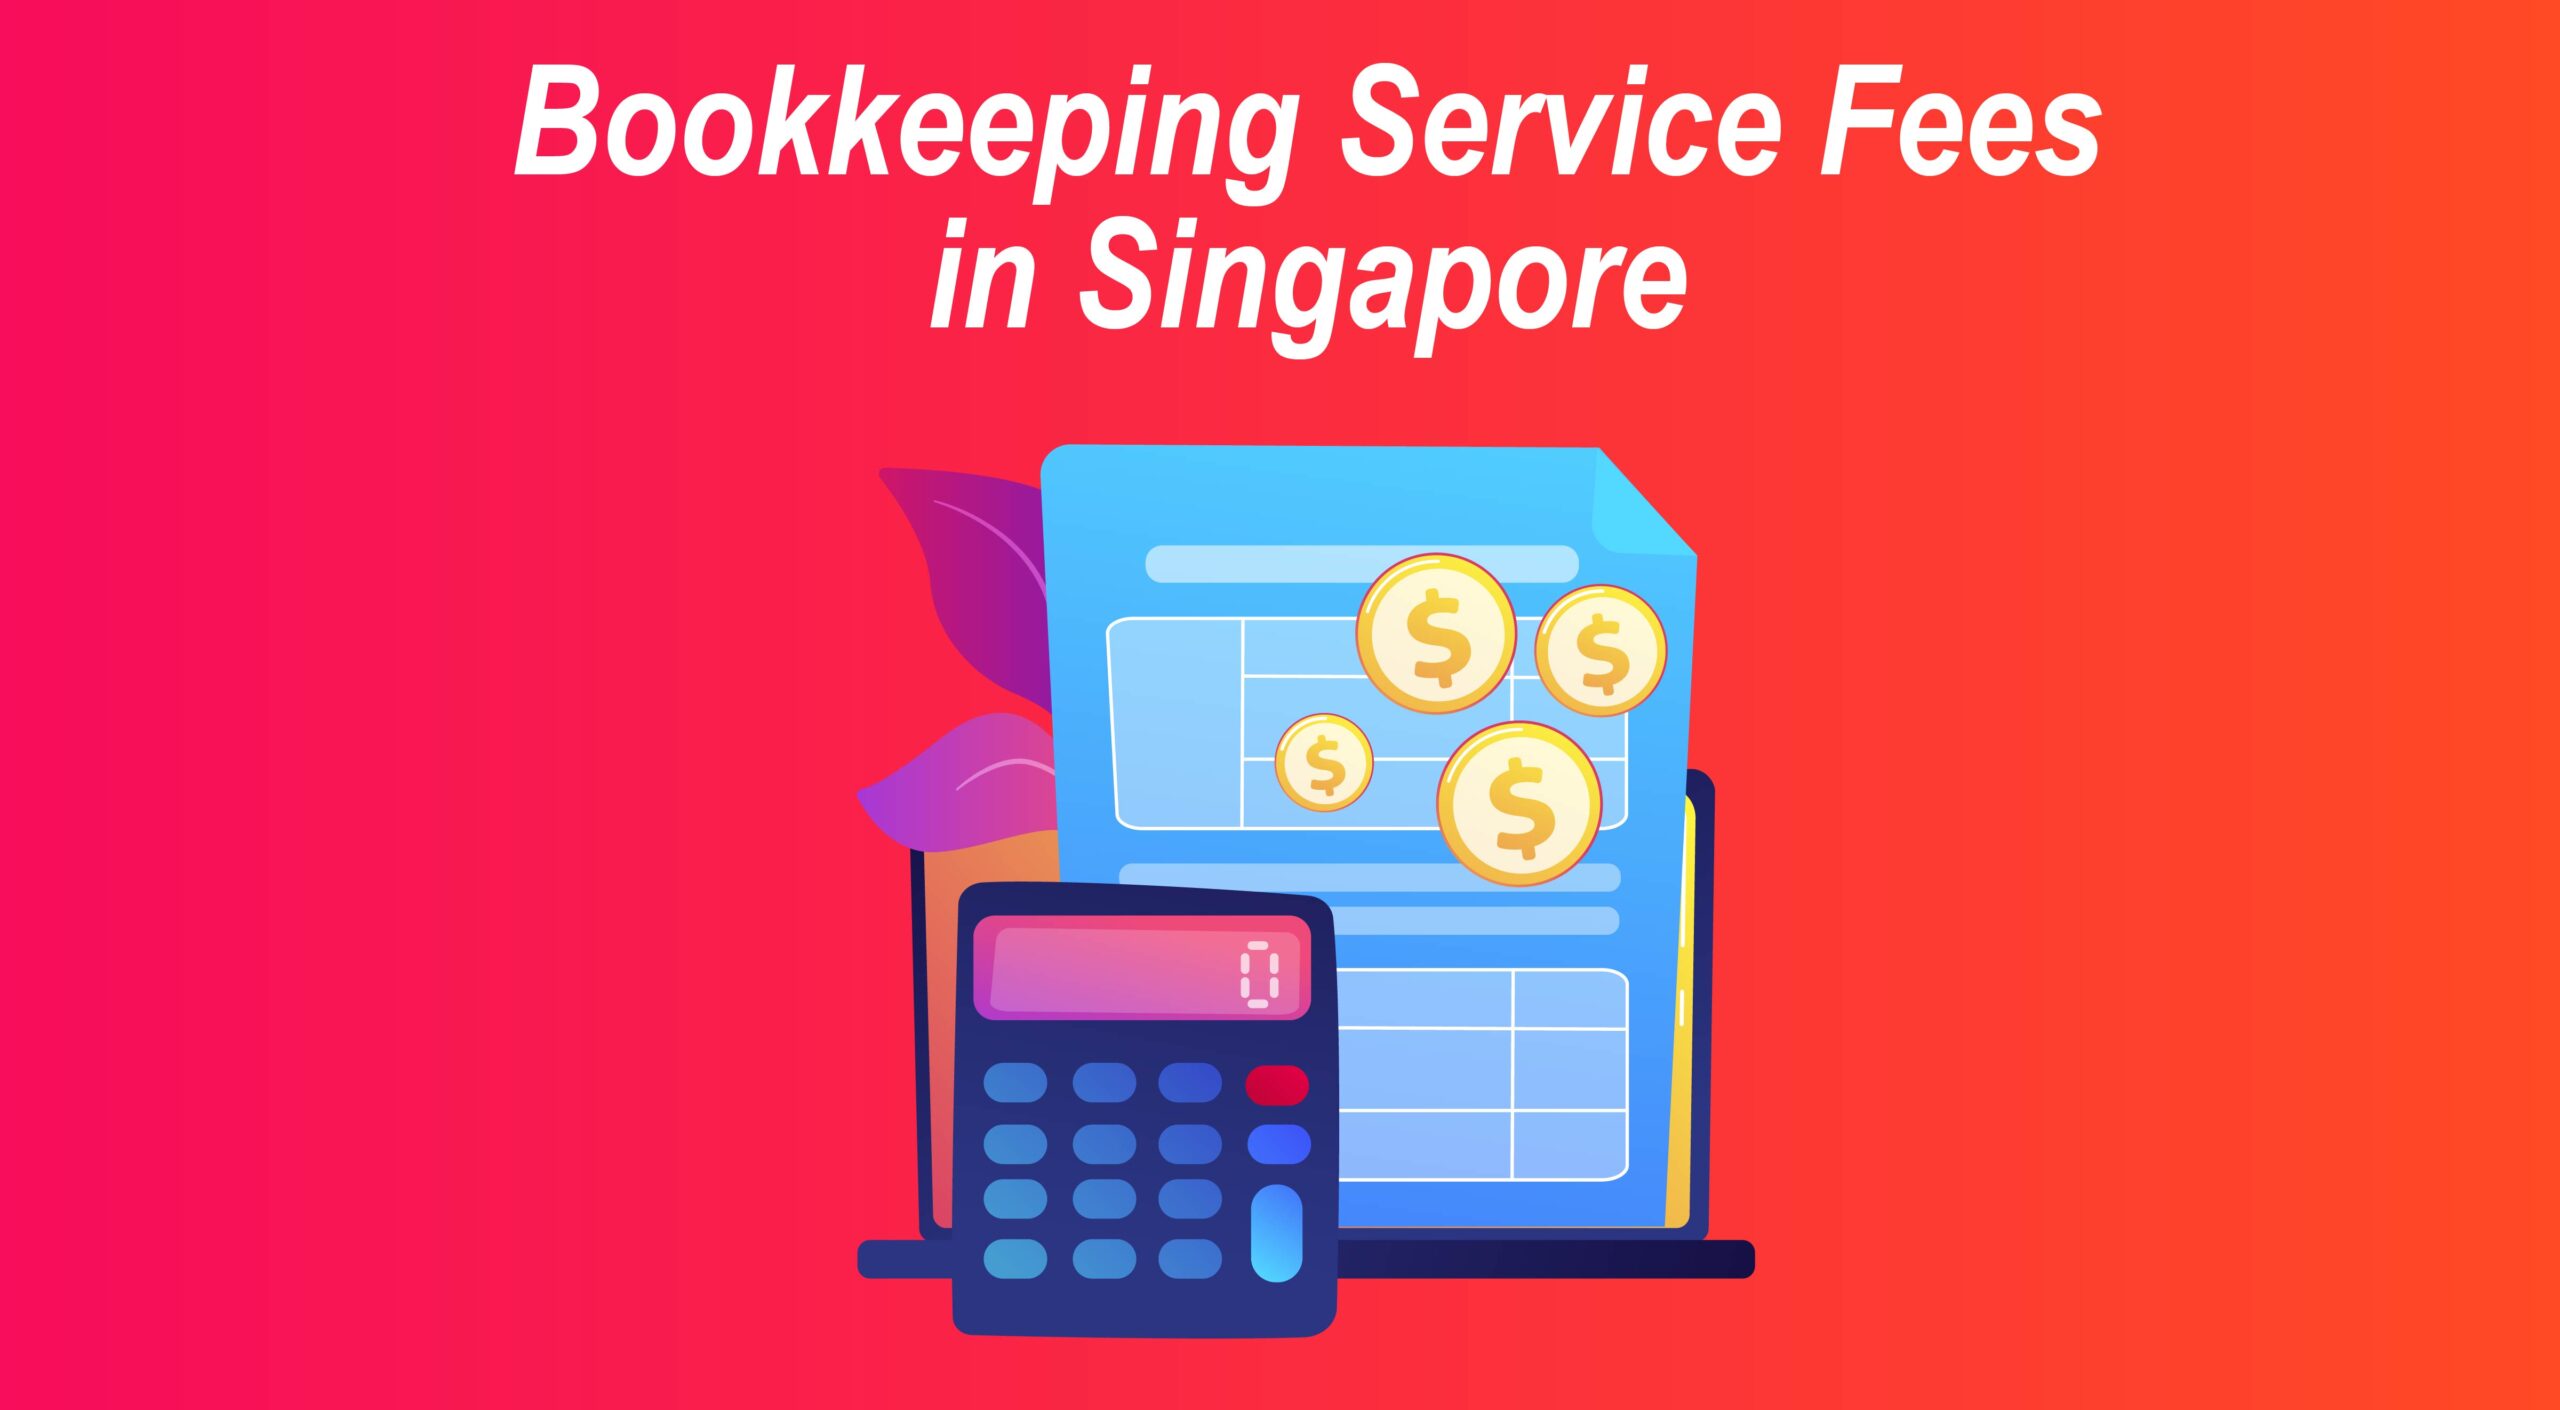 Bookkeeping Service Fees in Singapore